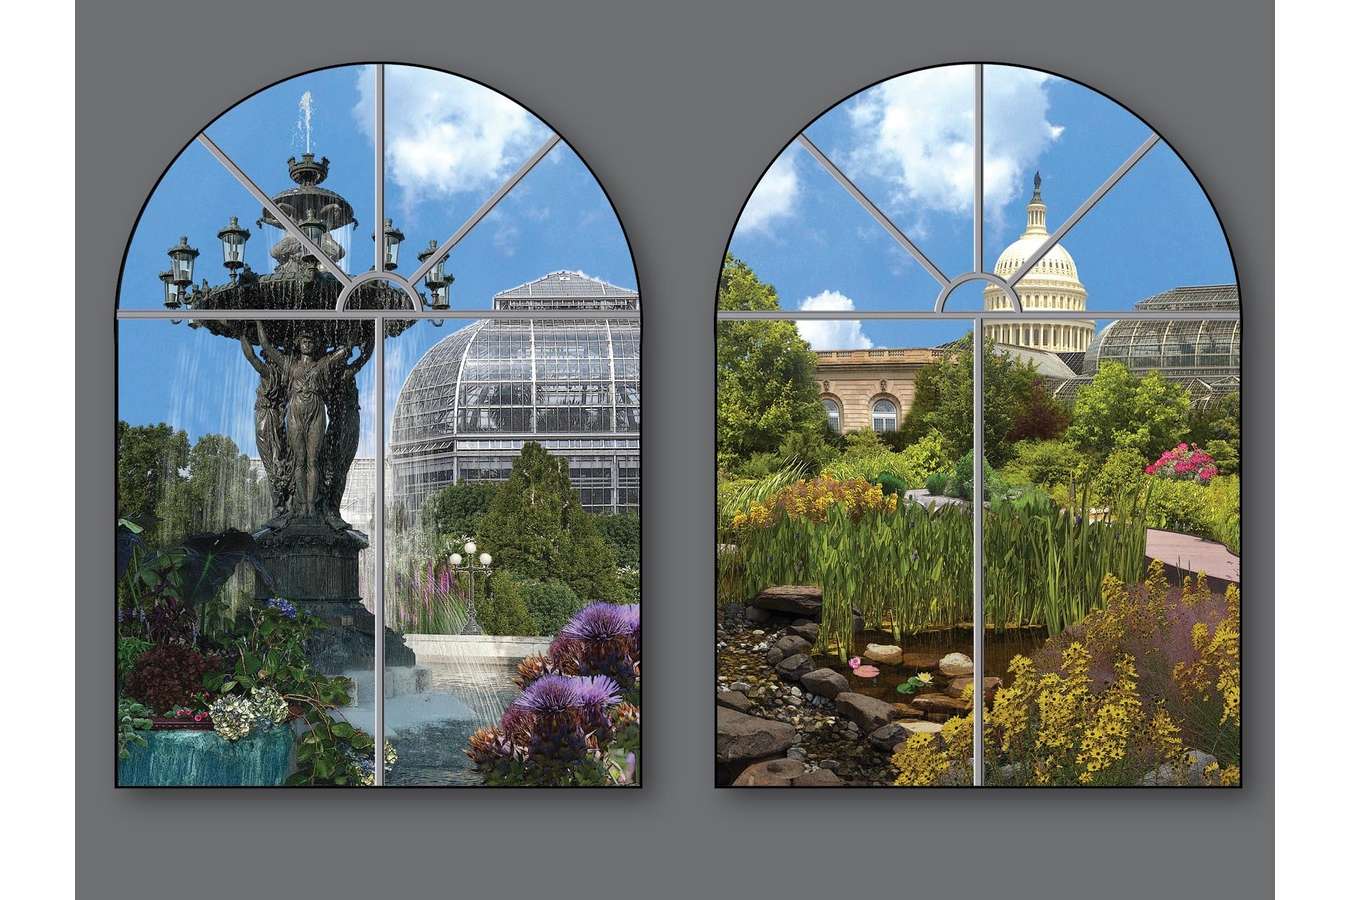 Display Graphics 16 : United States Botanical Garden spring display in main hall, 12' high fabric murals